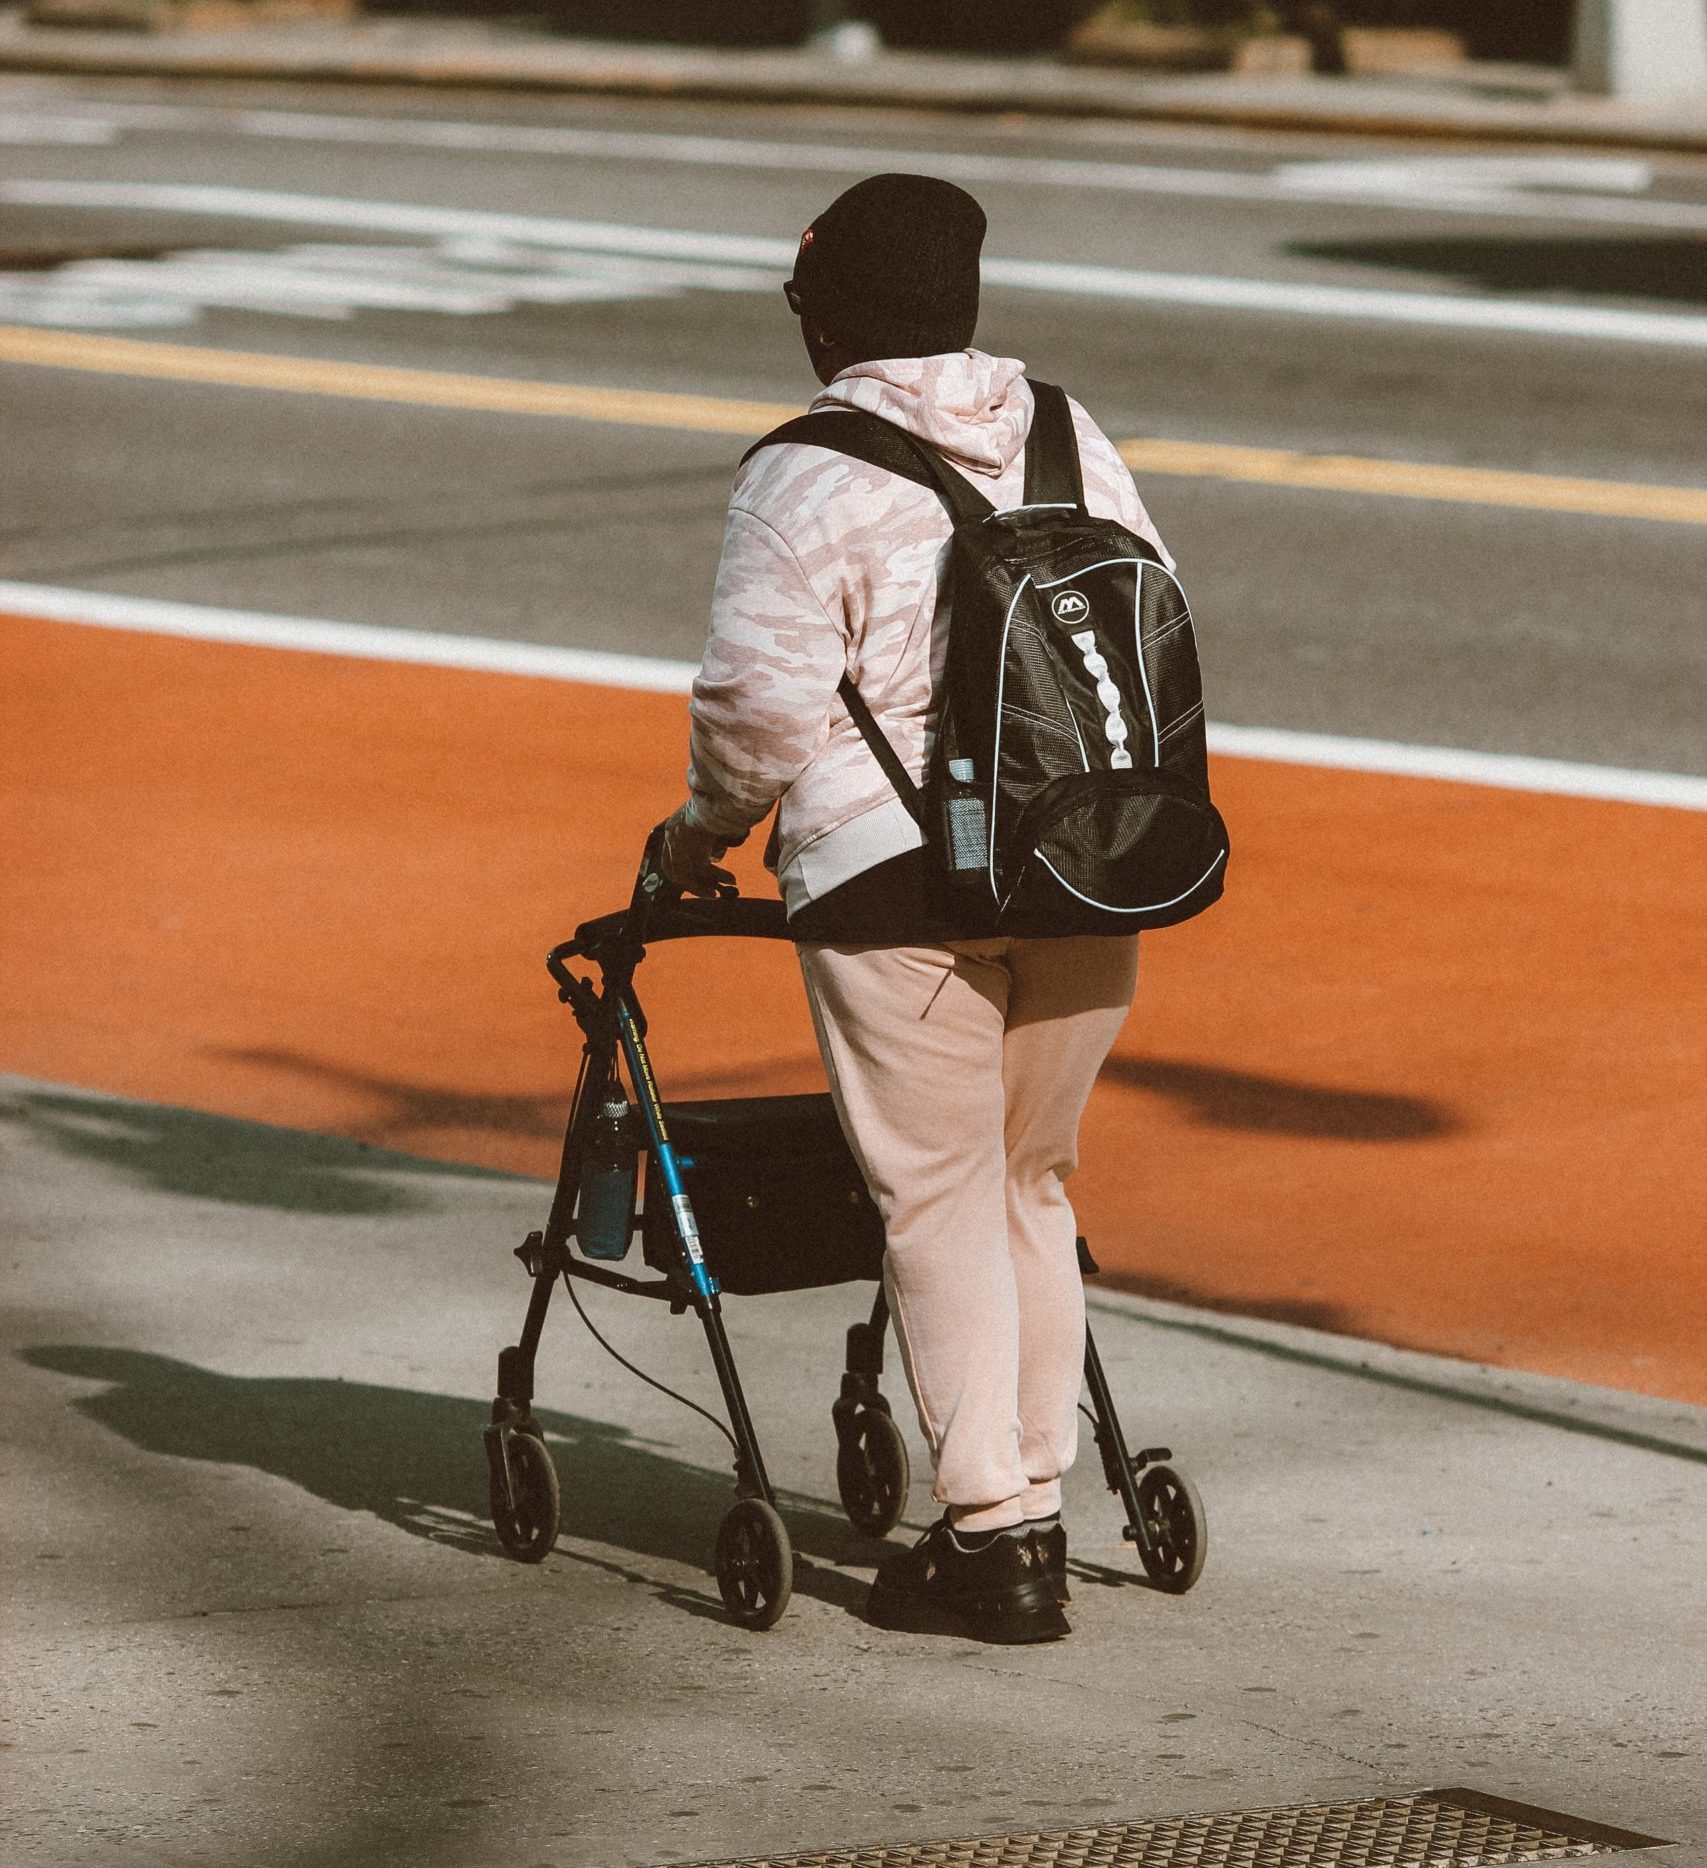 A young person using their walker (assistive technology) on a city sidewalk